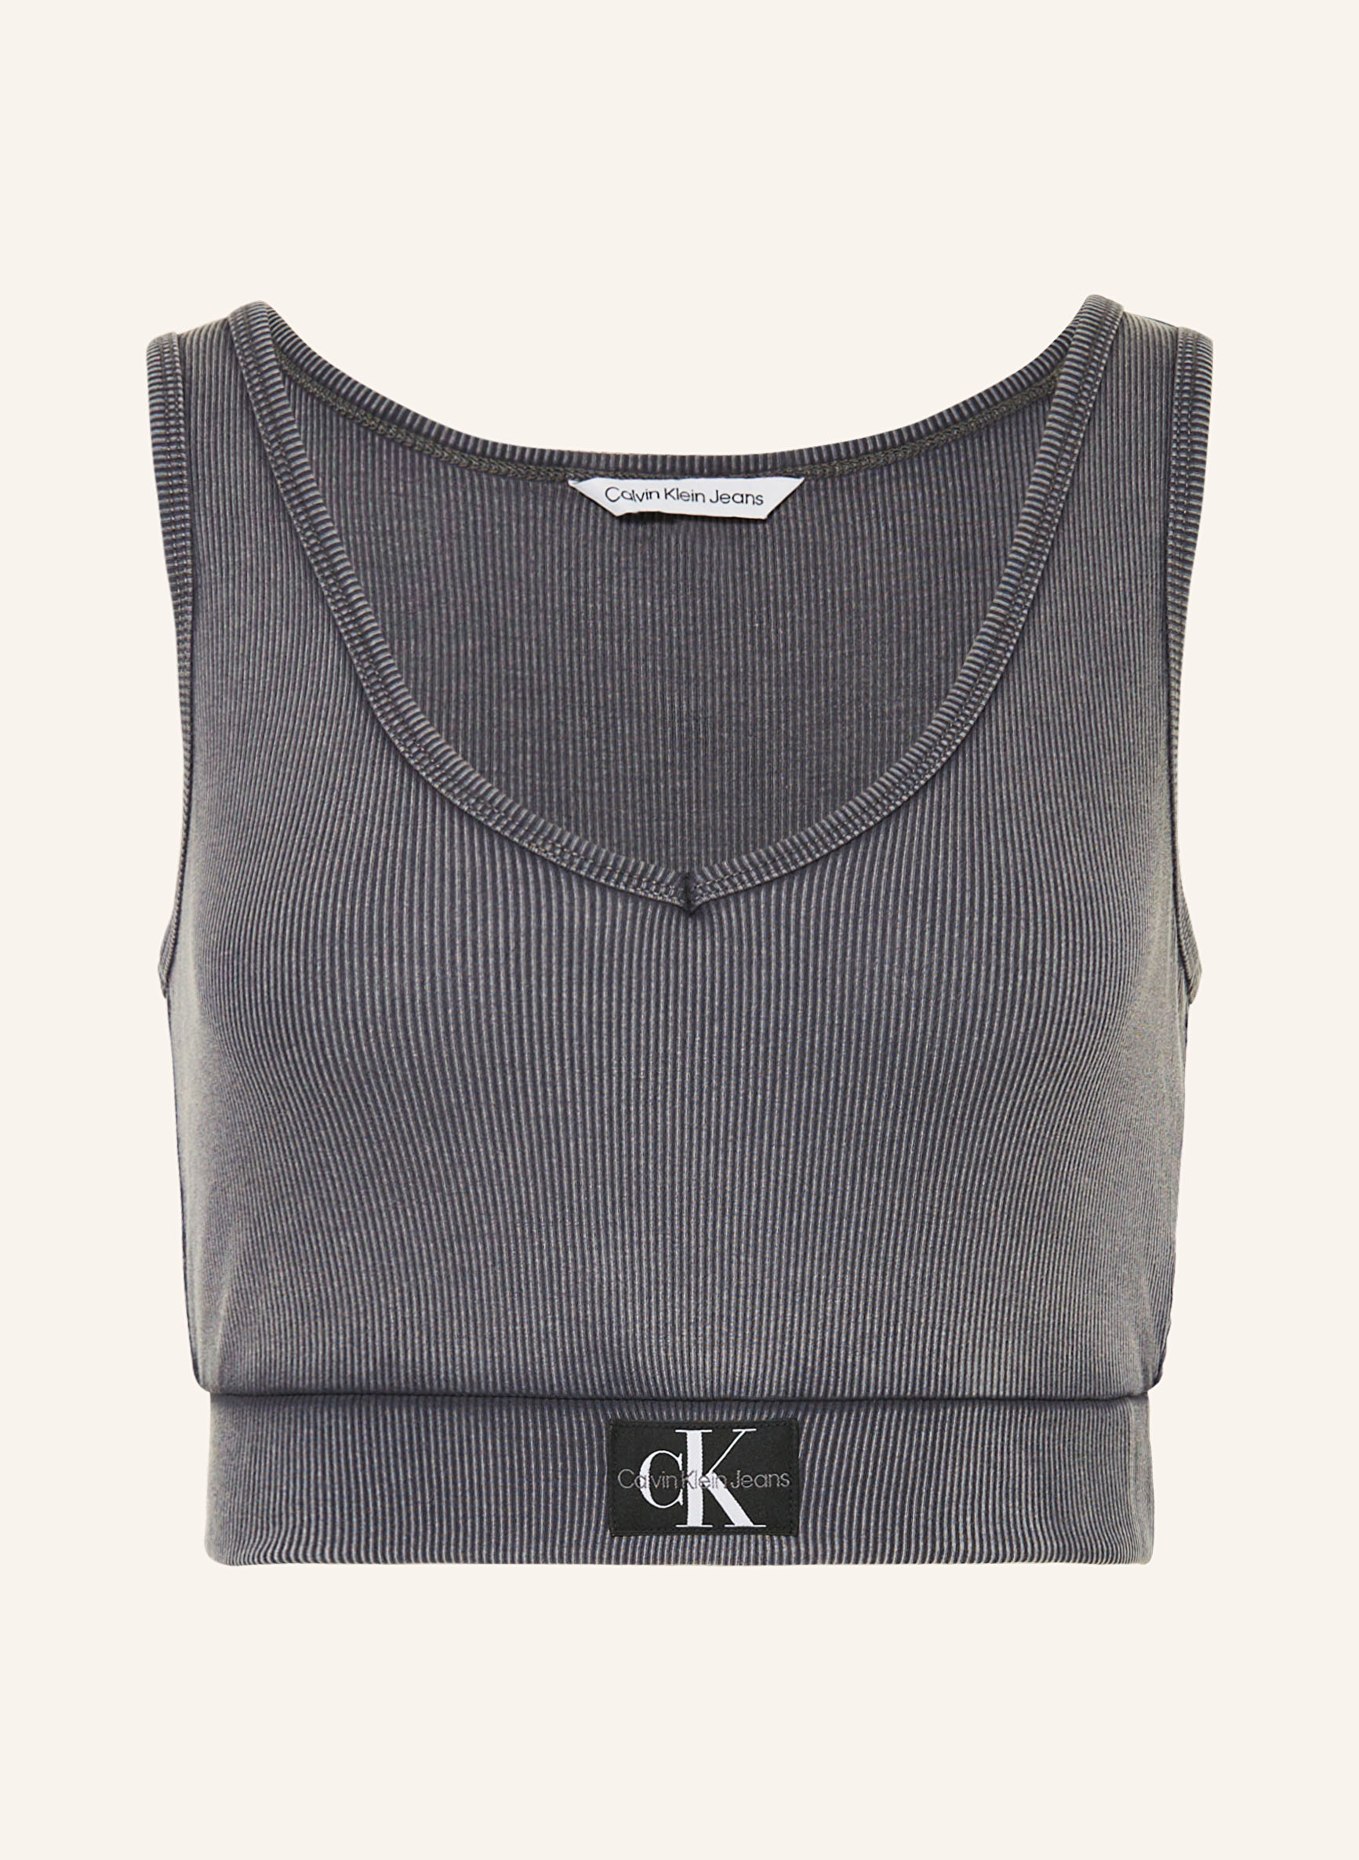 Calvin Klein Jeans Cropped top, Color: GRAY (Image 1)